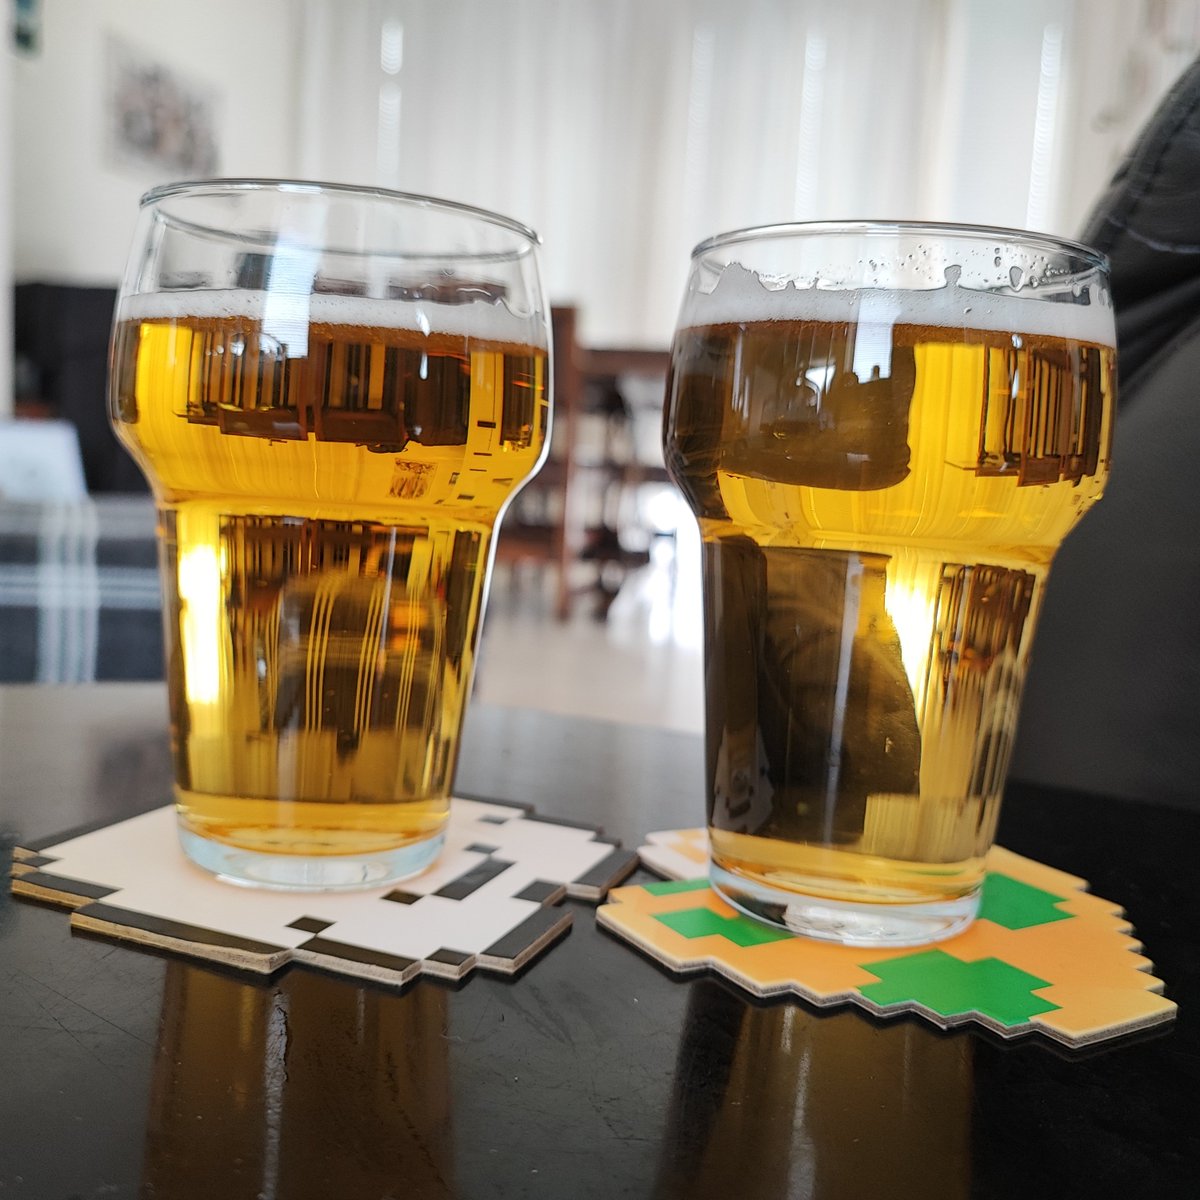 Keeping up some basic beer tasting skills. 

As for the last picture; can you guess which one is the Belgian Tripel and which one is the German style Pils? 

#beer #bierdame #beerblog #beertraining